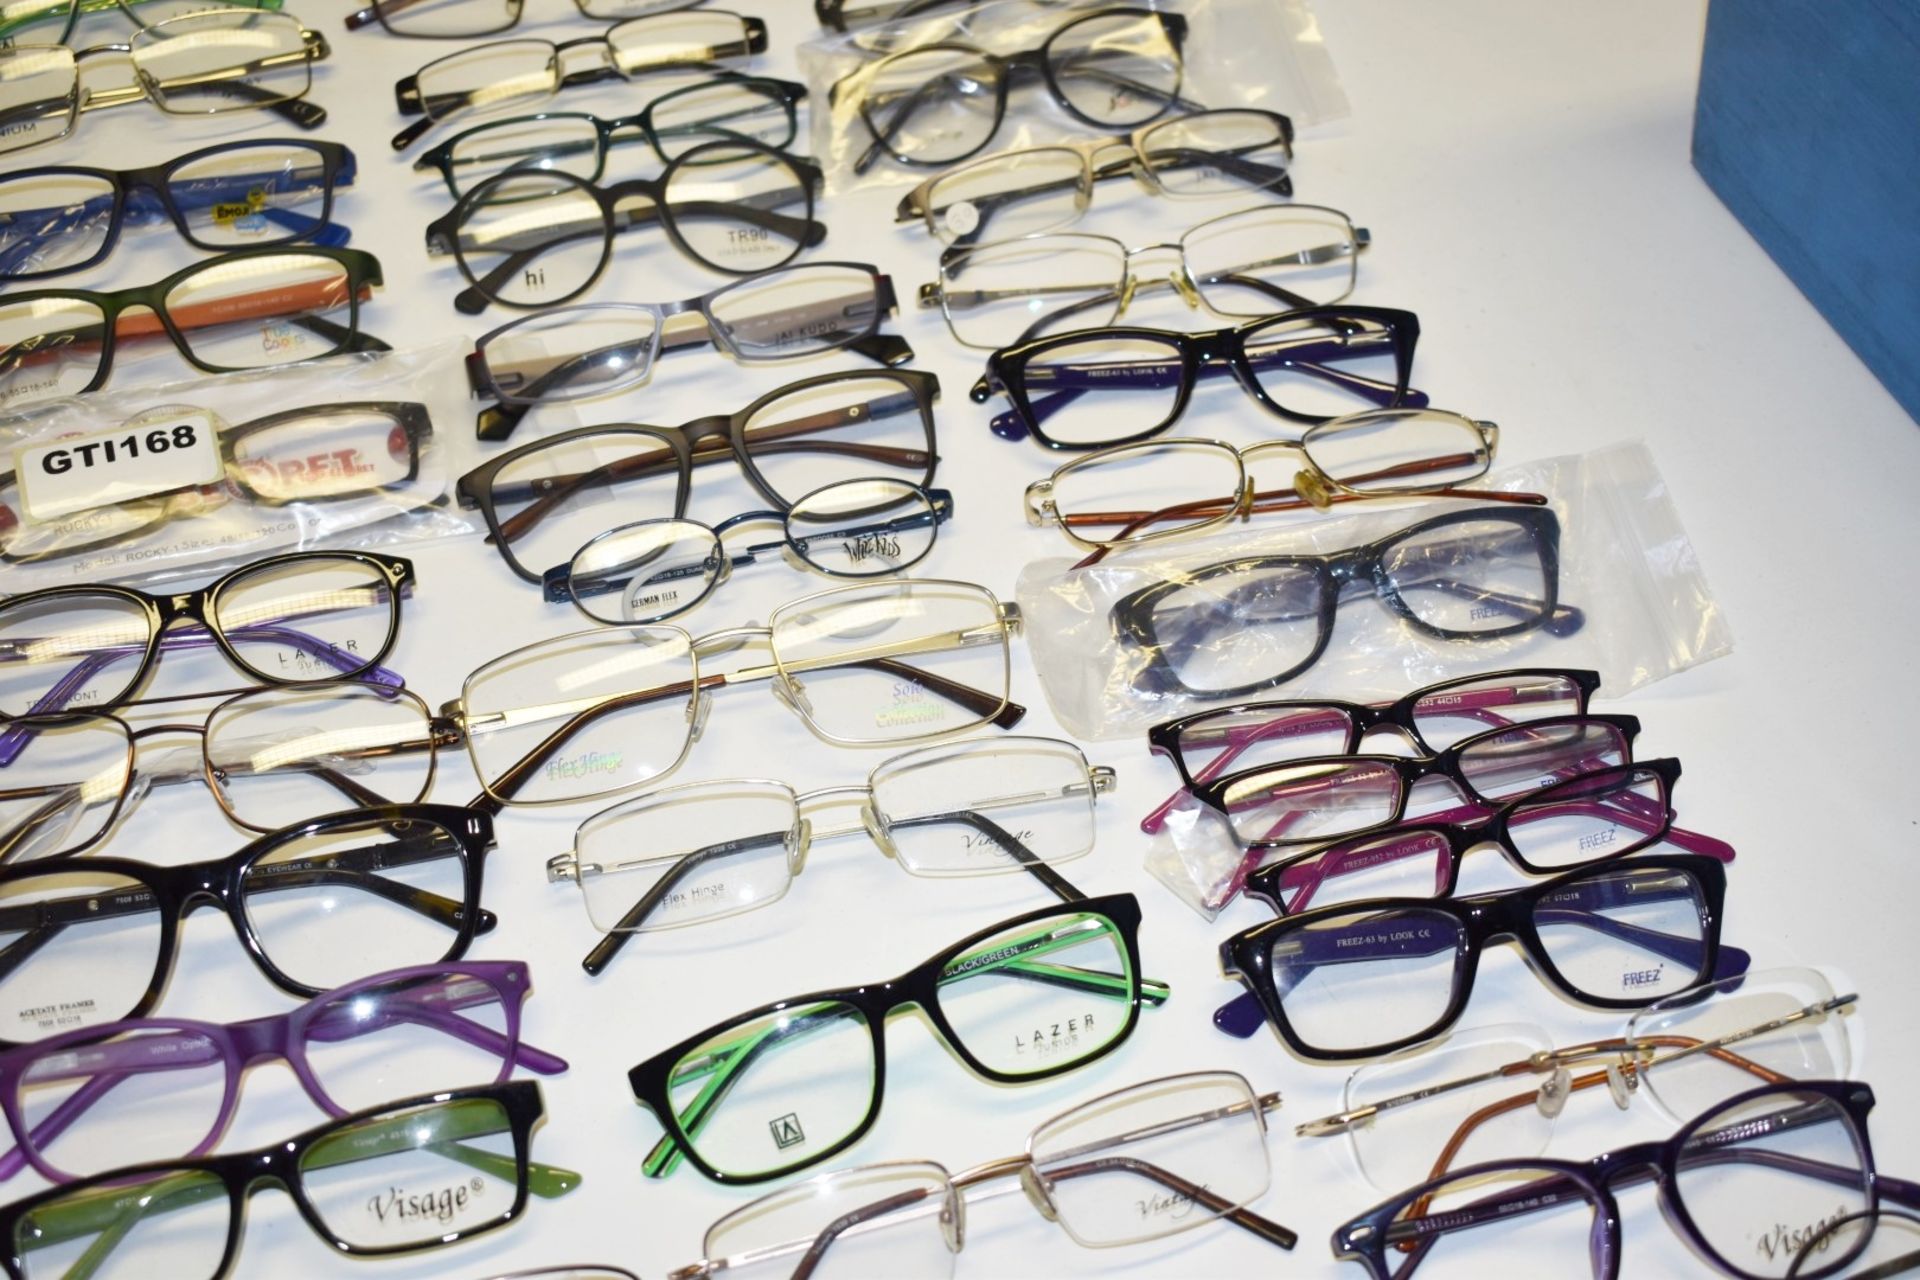 100 x Assorted Pairs of Spectacle Eye Glasses - New and Unused Stock - Various Designs and Brands - Image 22 of 27